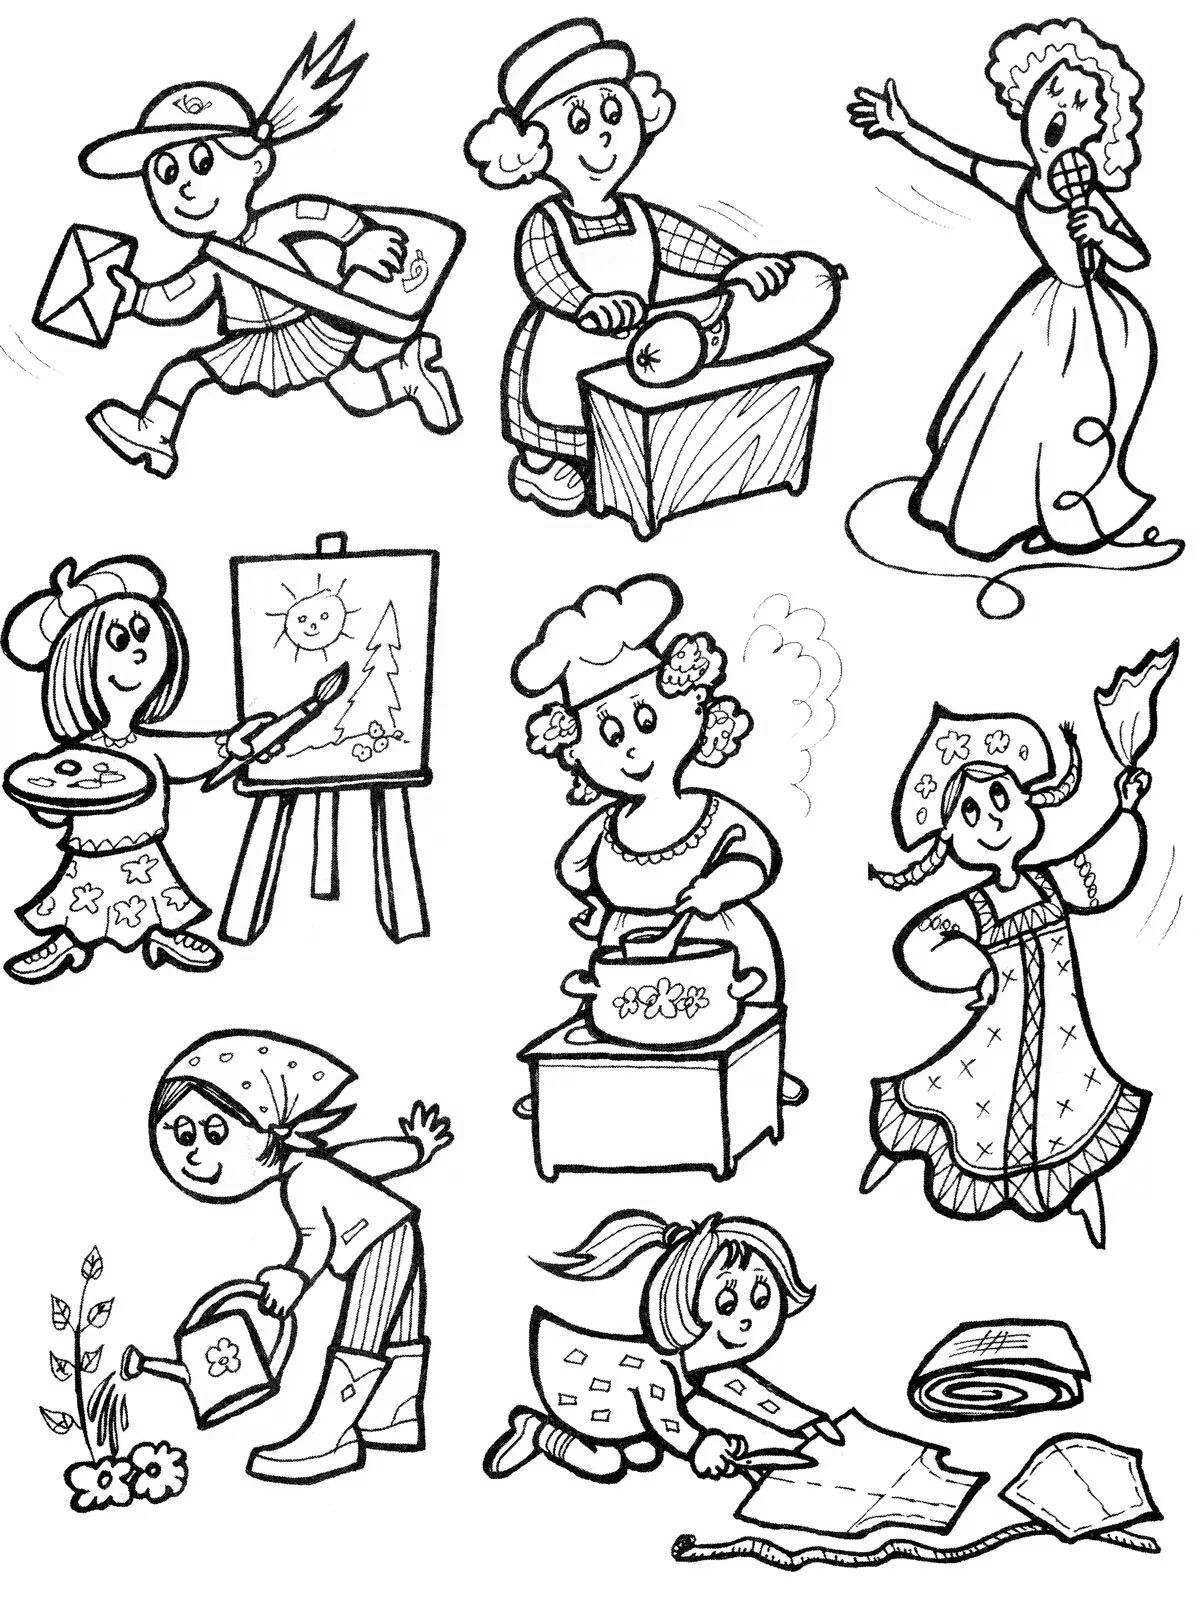 Colorful hobby coloring page